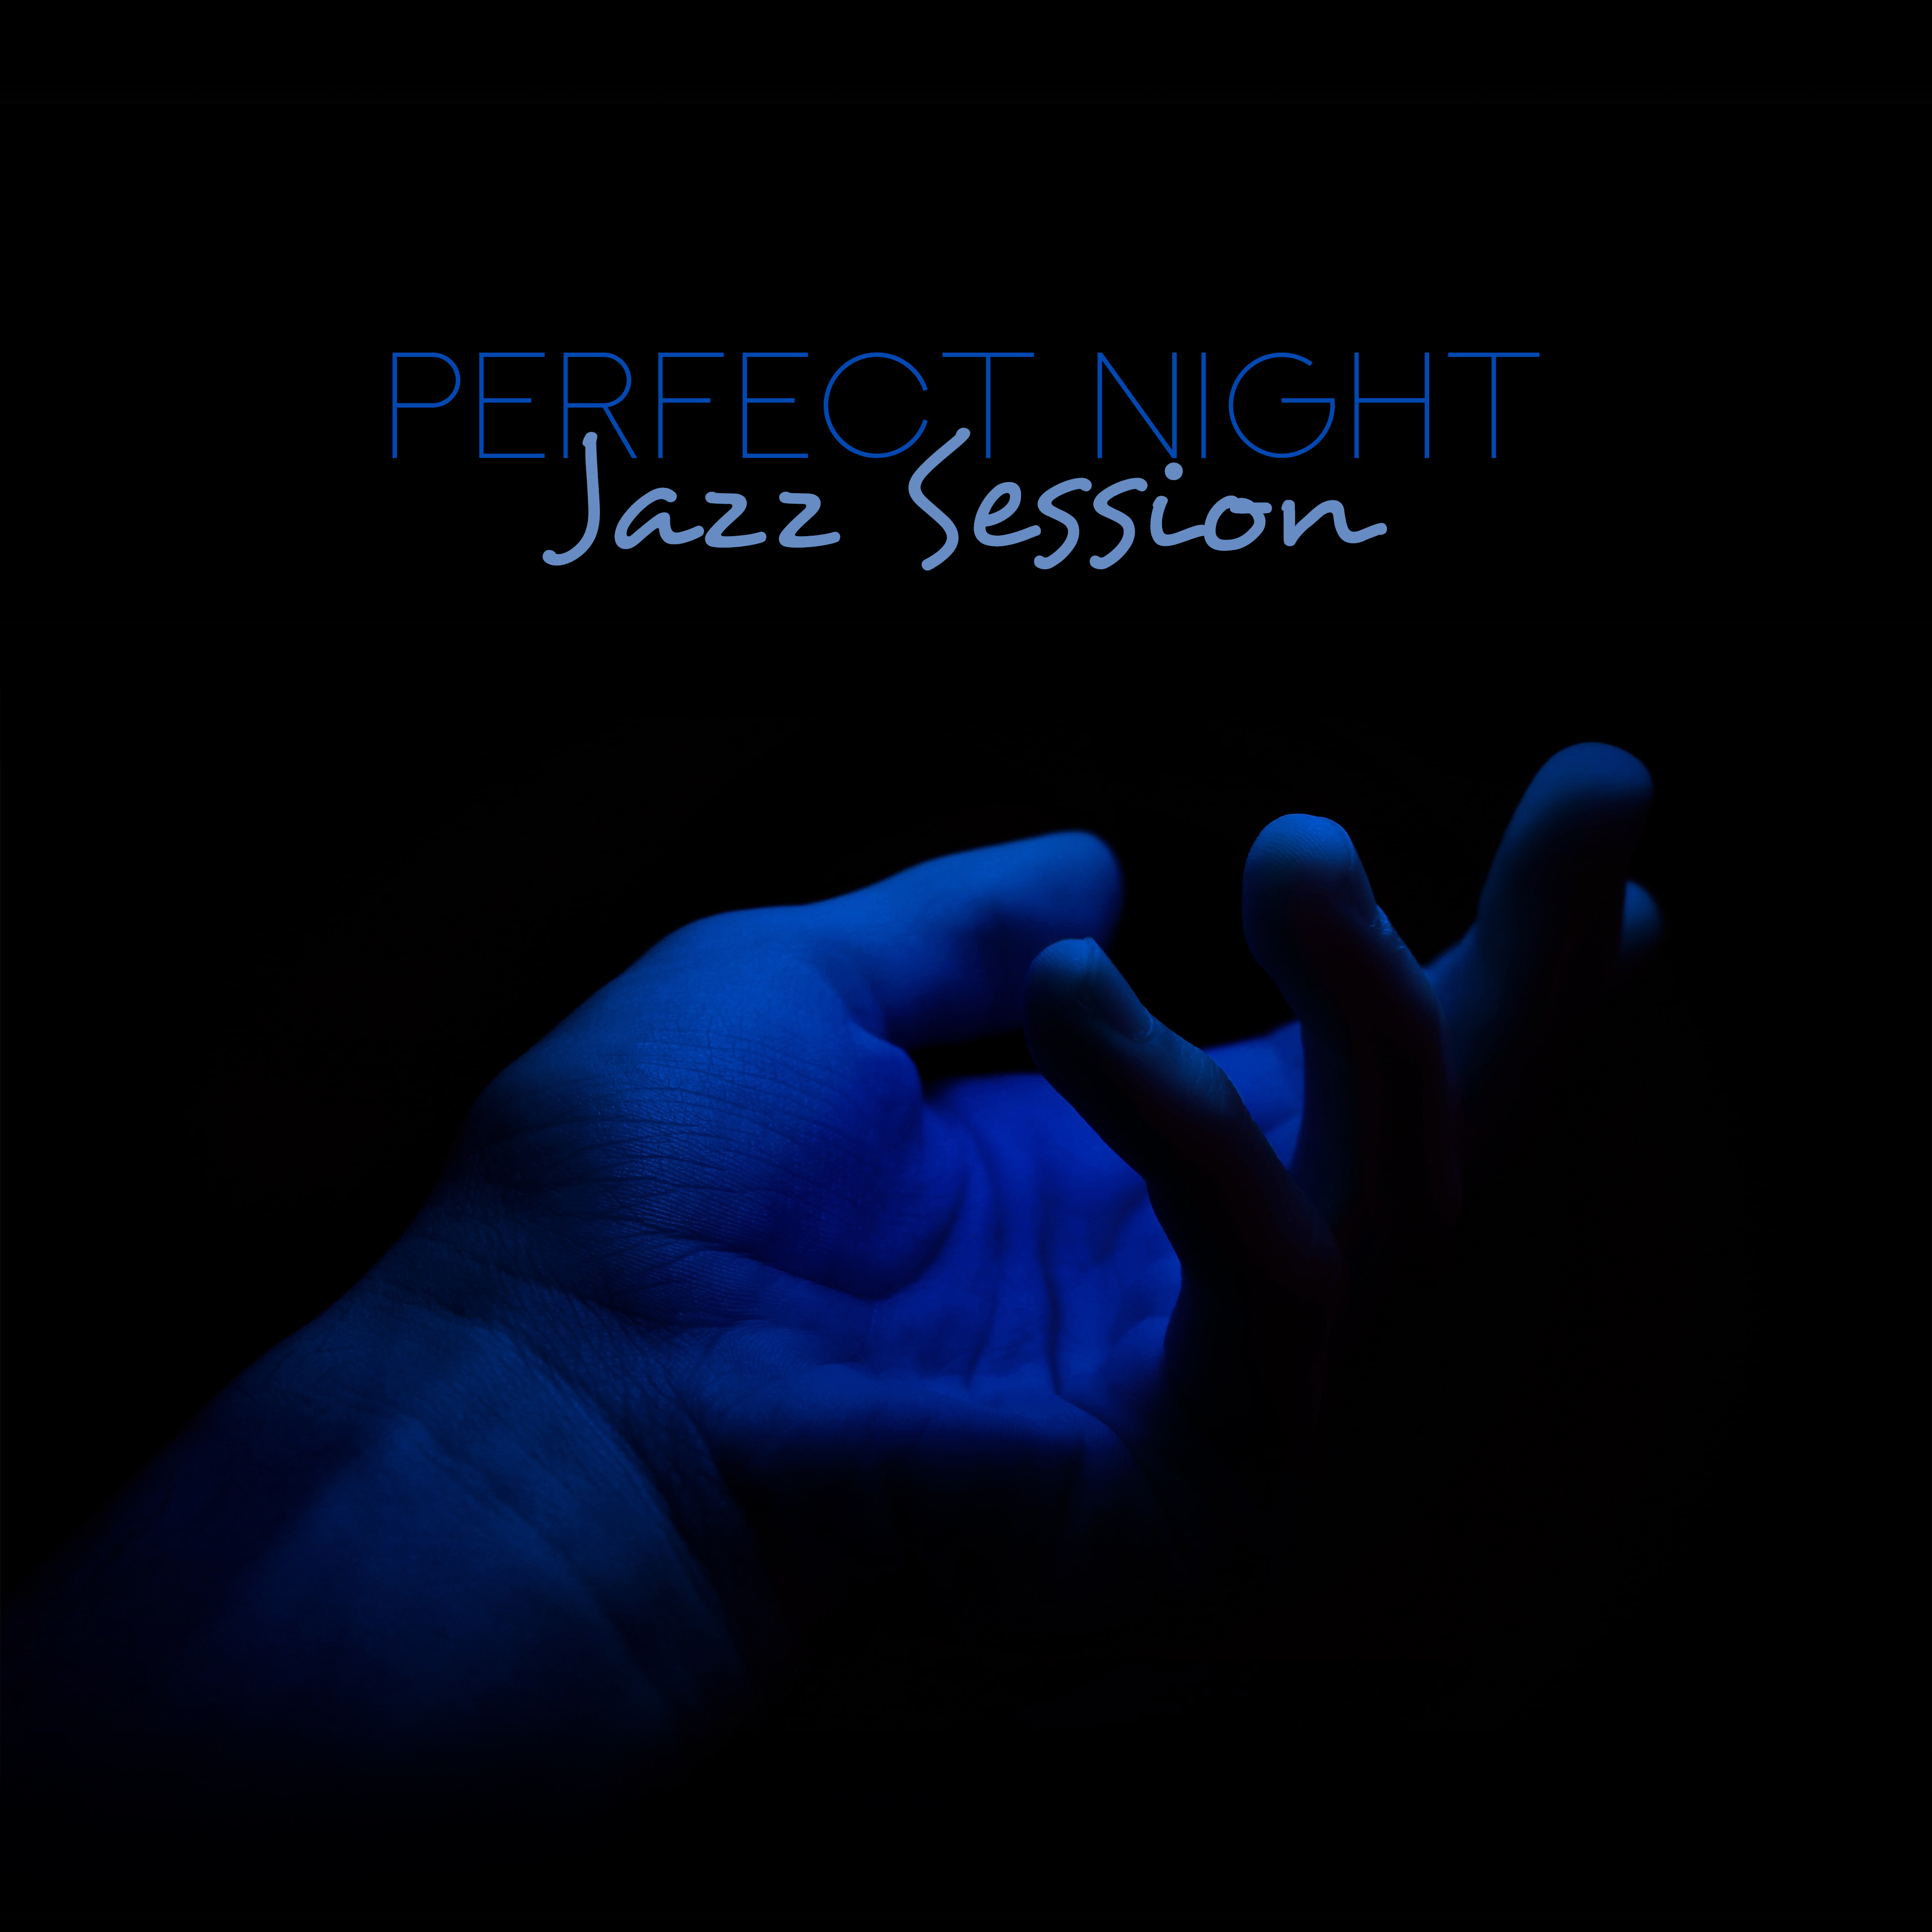 Perfect Night Jazz Session – Fresh Instrumental Jazz Songs 2019, Party Dancing Melodies